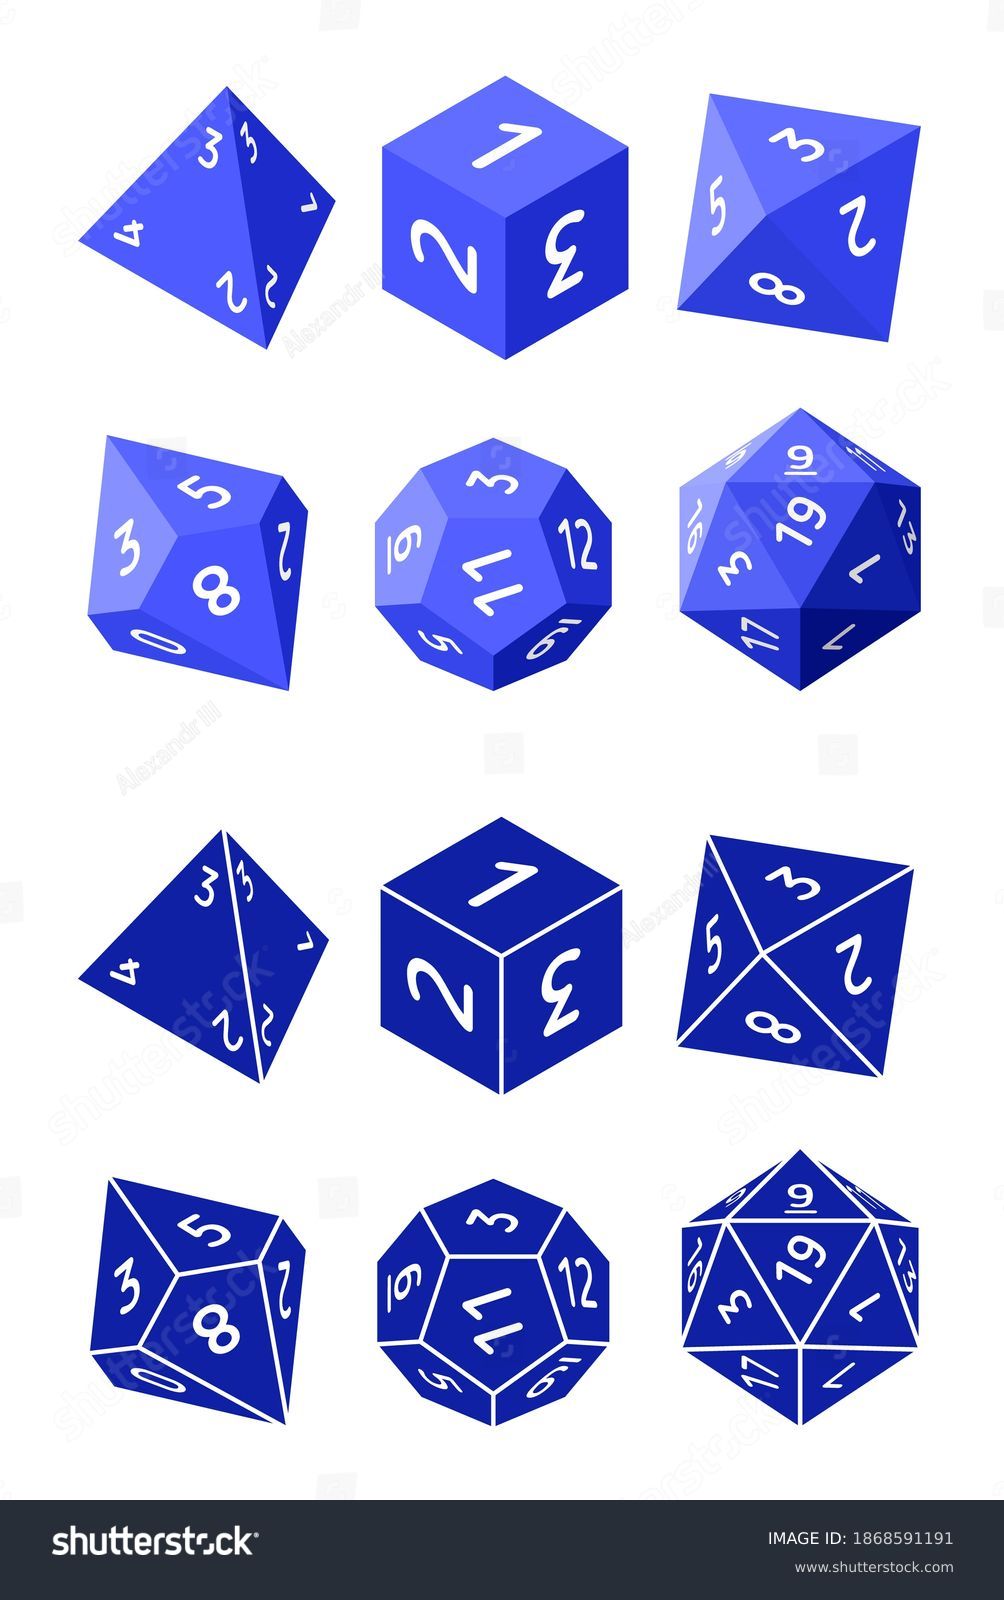 SVG of D4, D6, D8, D10, D12, and D20 Dice for Boardgames in Flat and Glyph Styles svg